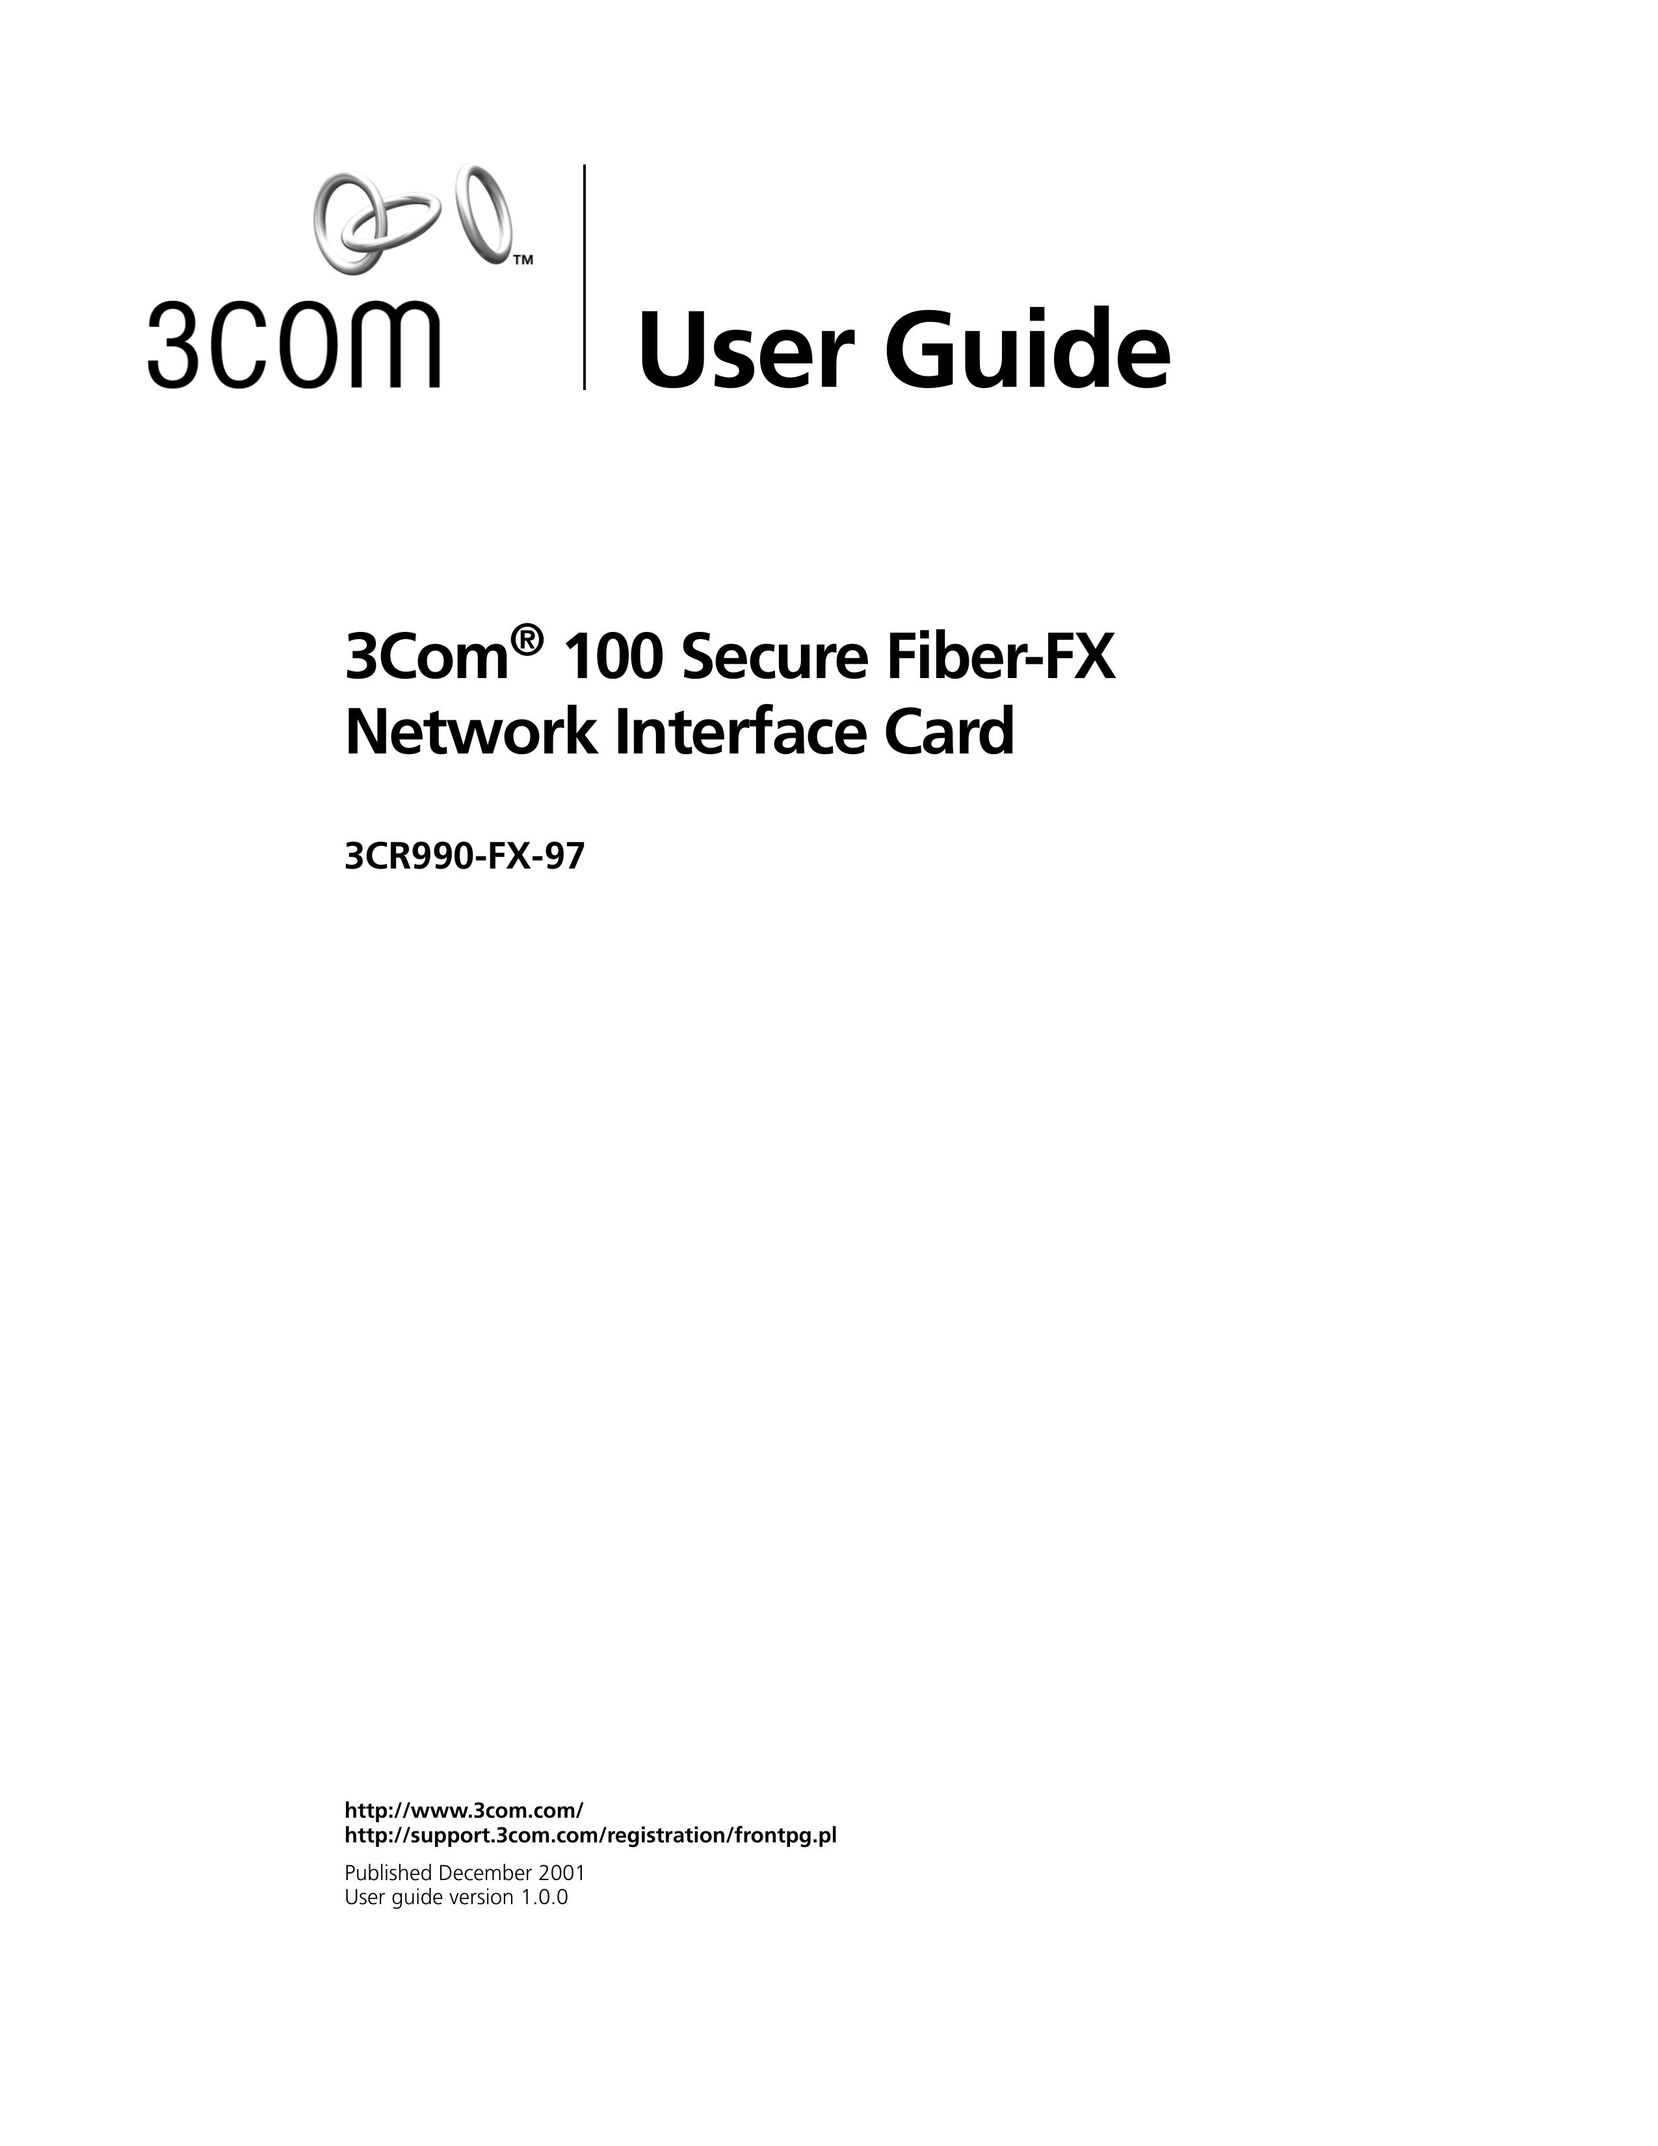 3Com 3CR990-FX-97 Network Card User Manual (Page 1)